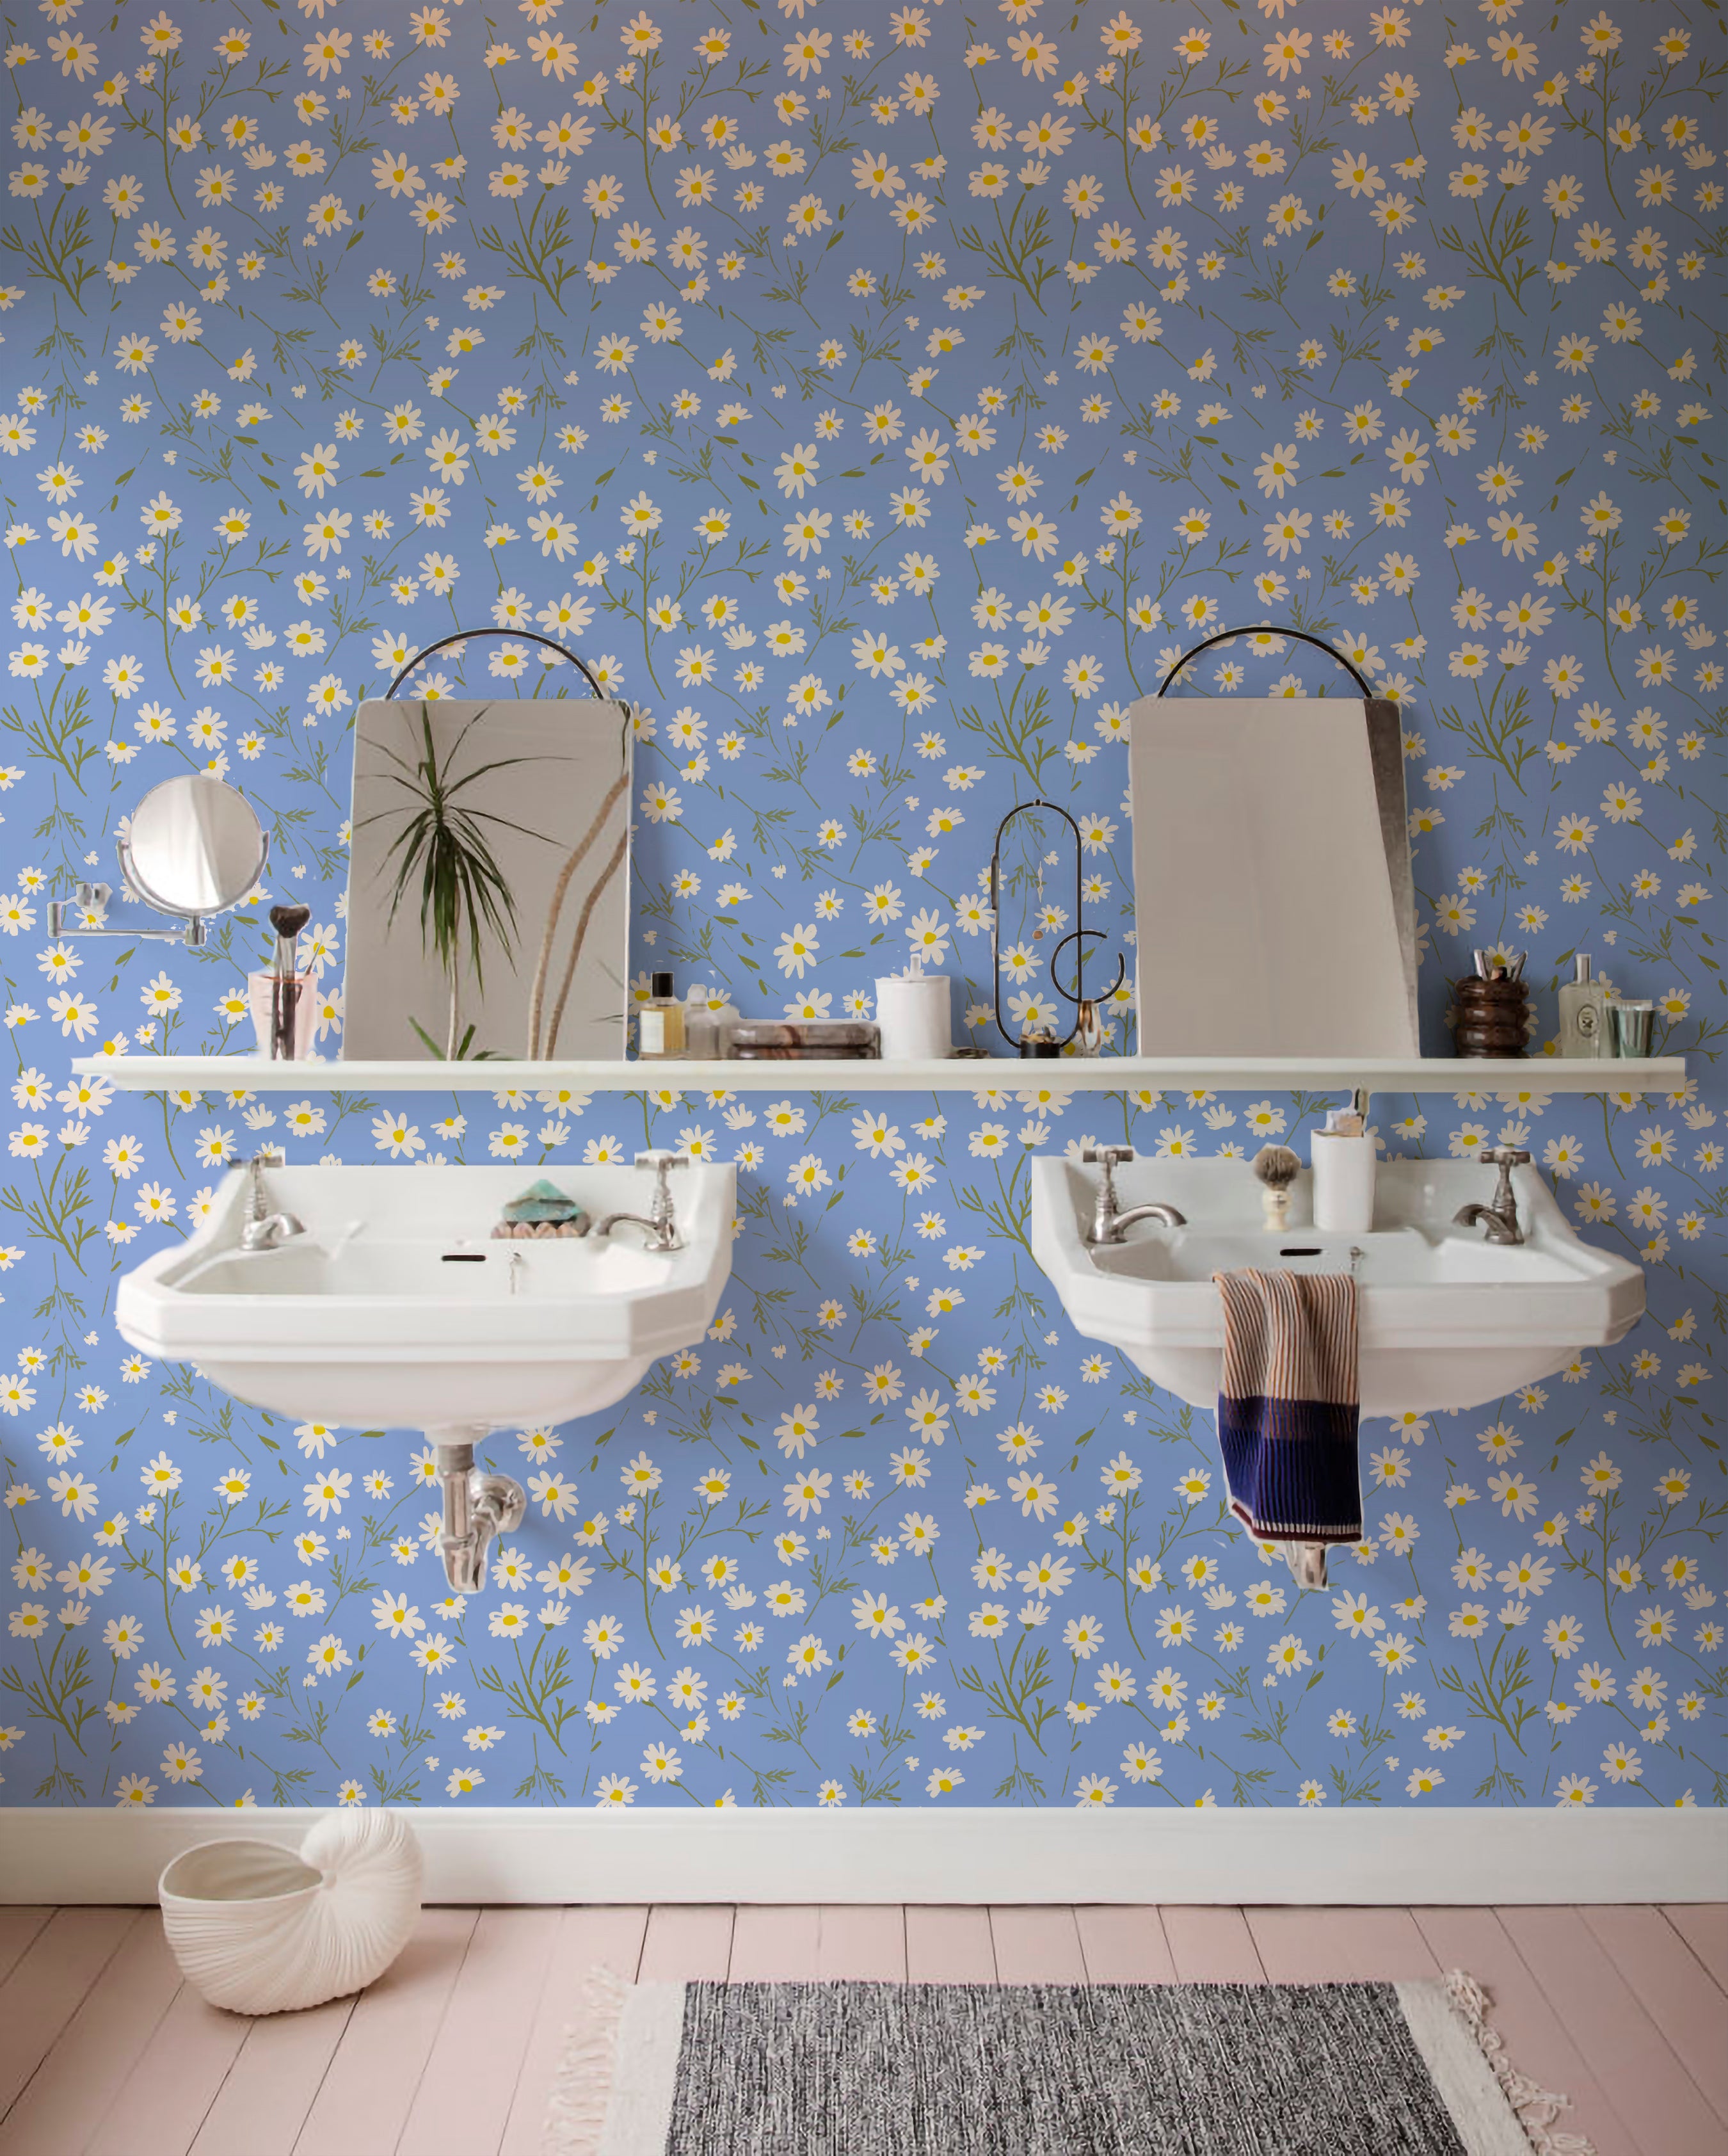 Spacious bathroom with twin white pedestal sinks against a wall covered in a blue floral wallpaper with white and yellow daisy patterns, complemented by a pink wooden floor and various bathroom accessories.